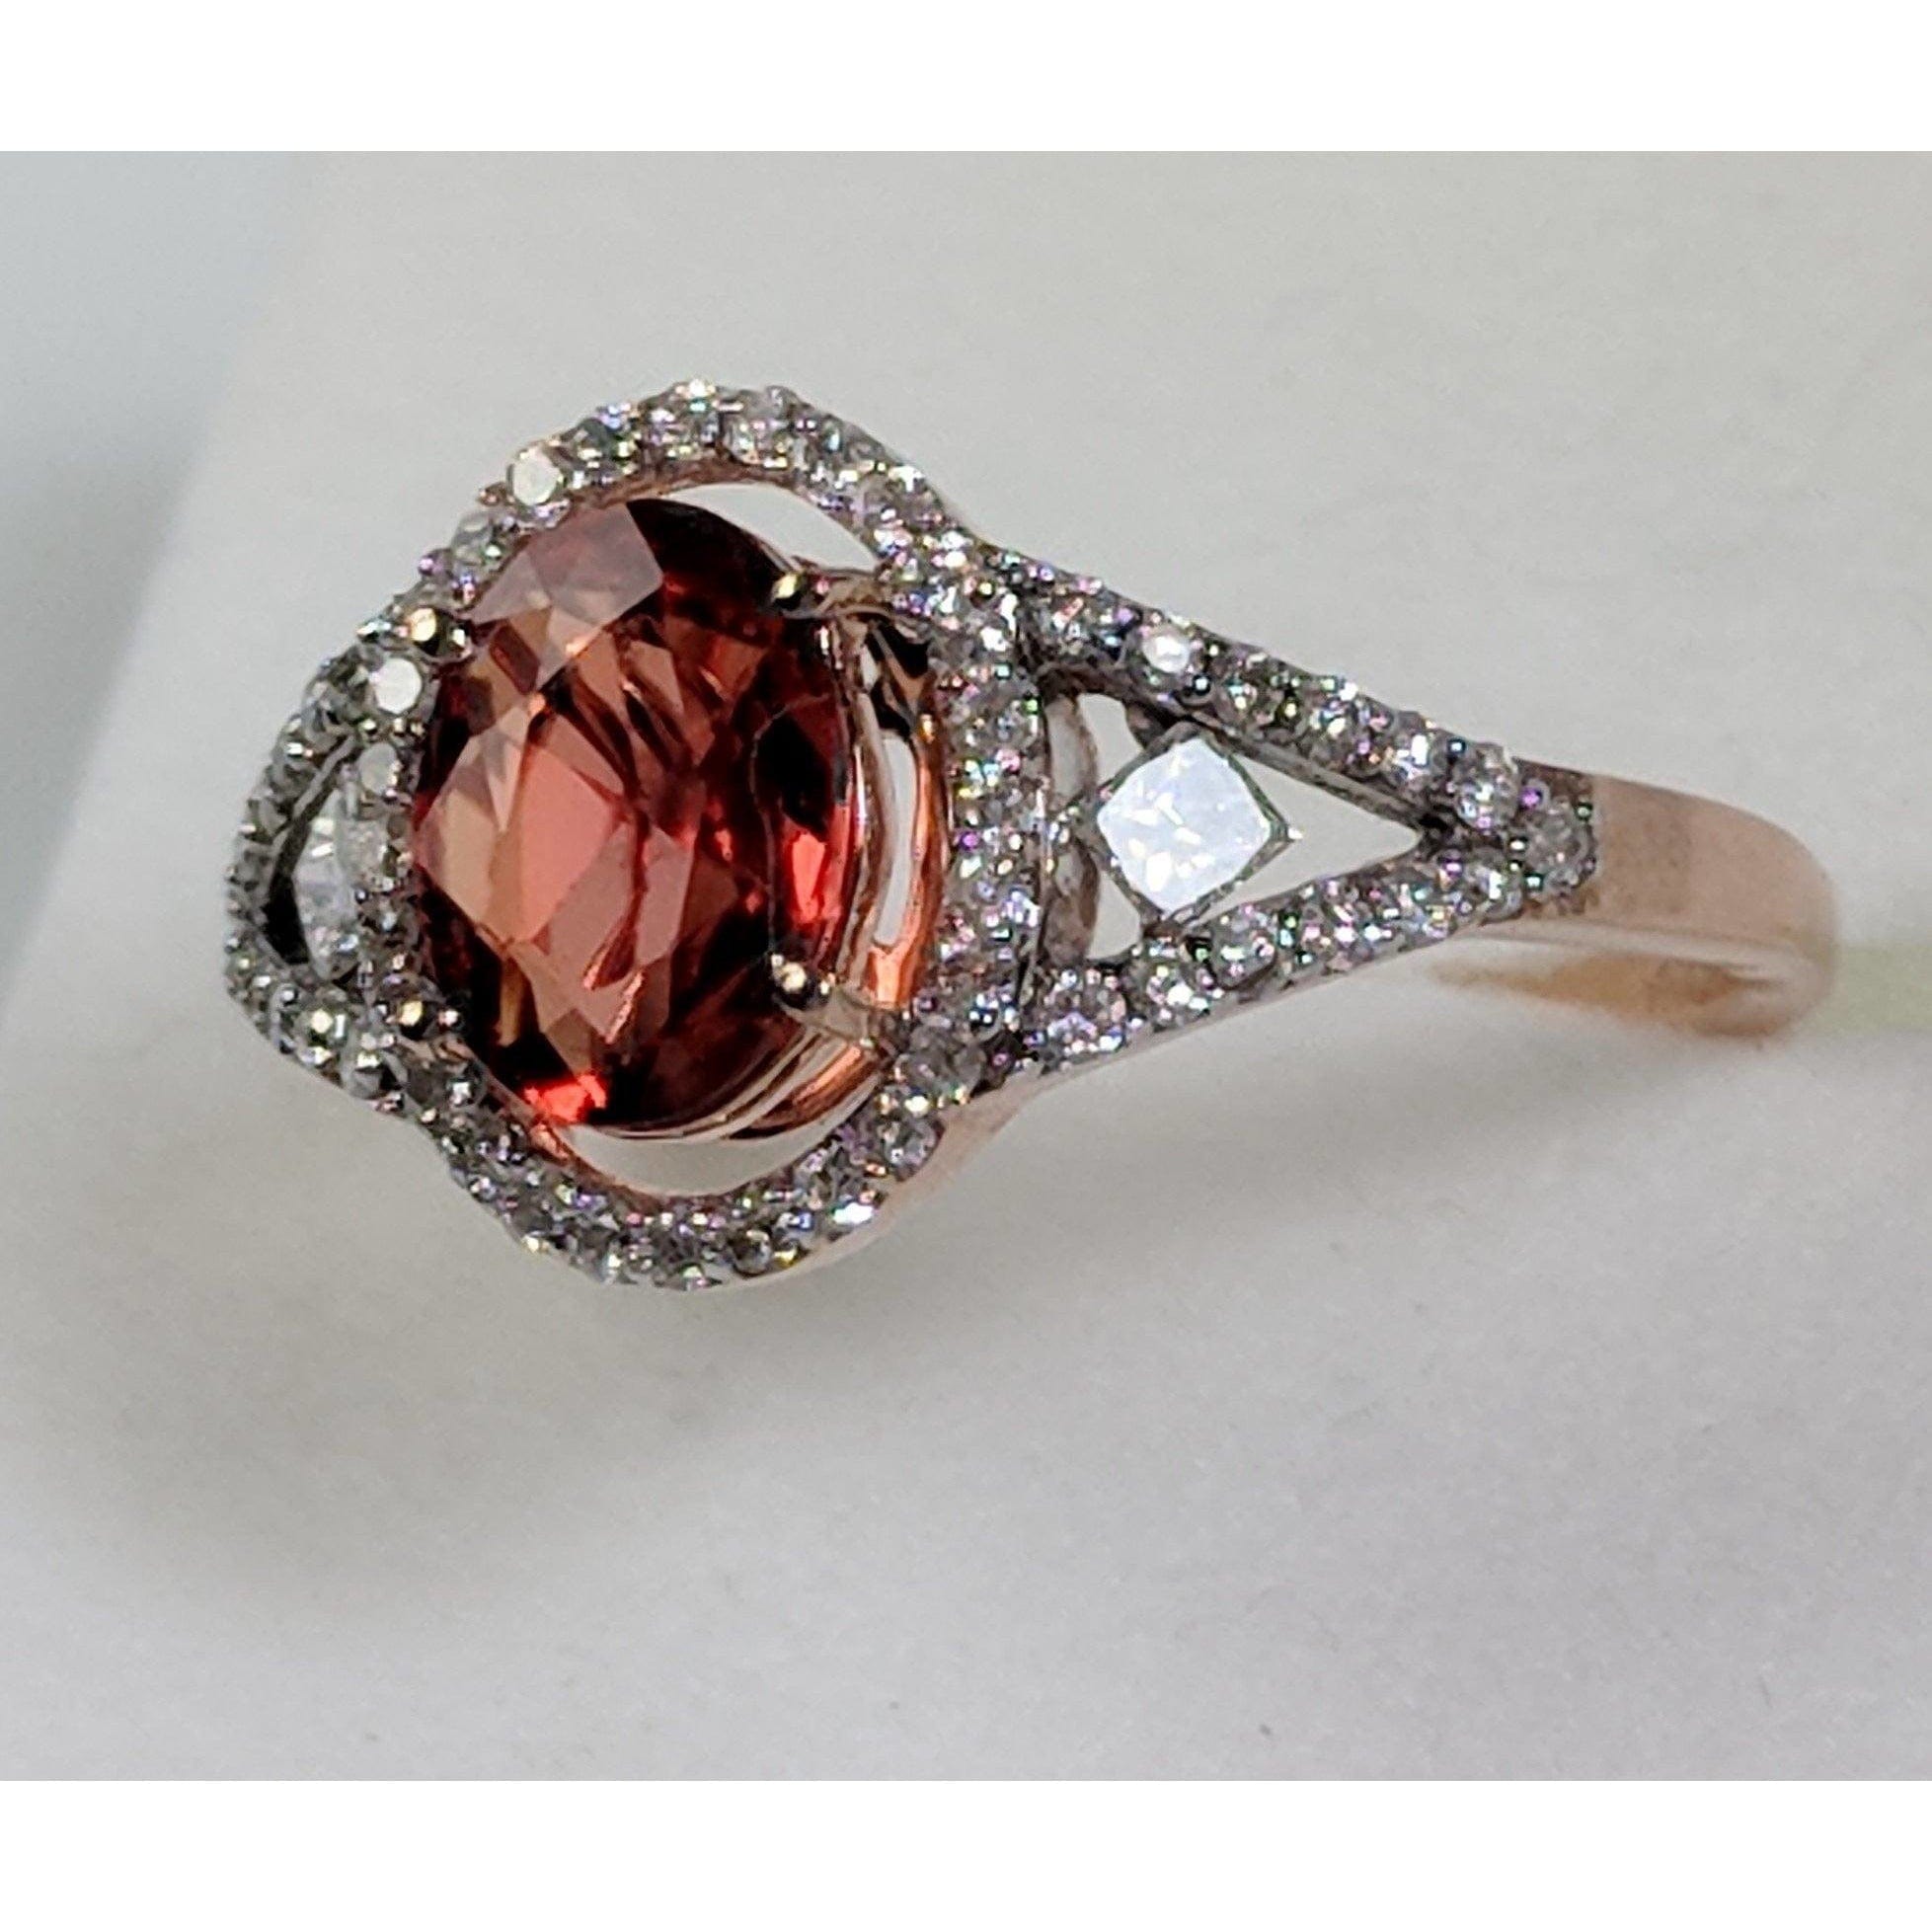 Rare 1.53ct Unheated Natural Orange Sapphire with .31cts Diamonds in 14K Rose Gold - The Pink Pigs, A Compassionate Boutique